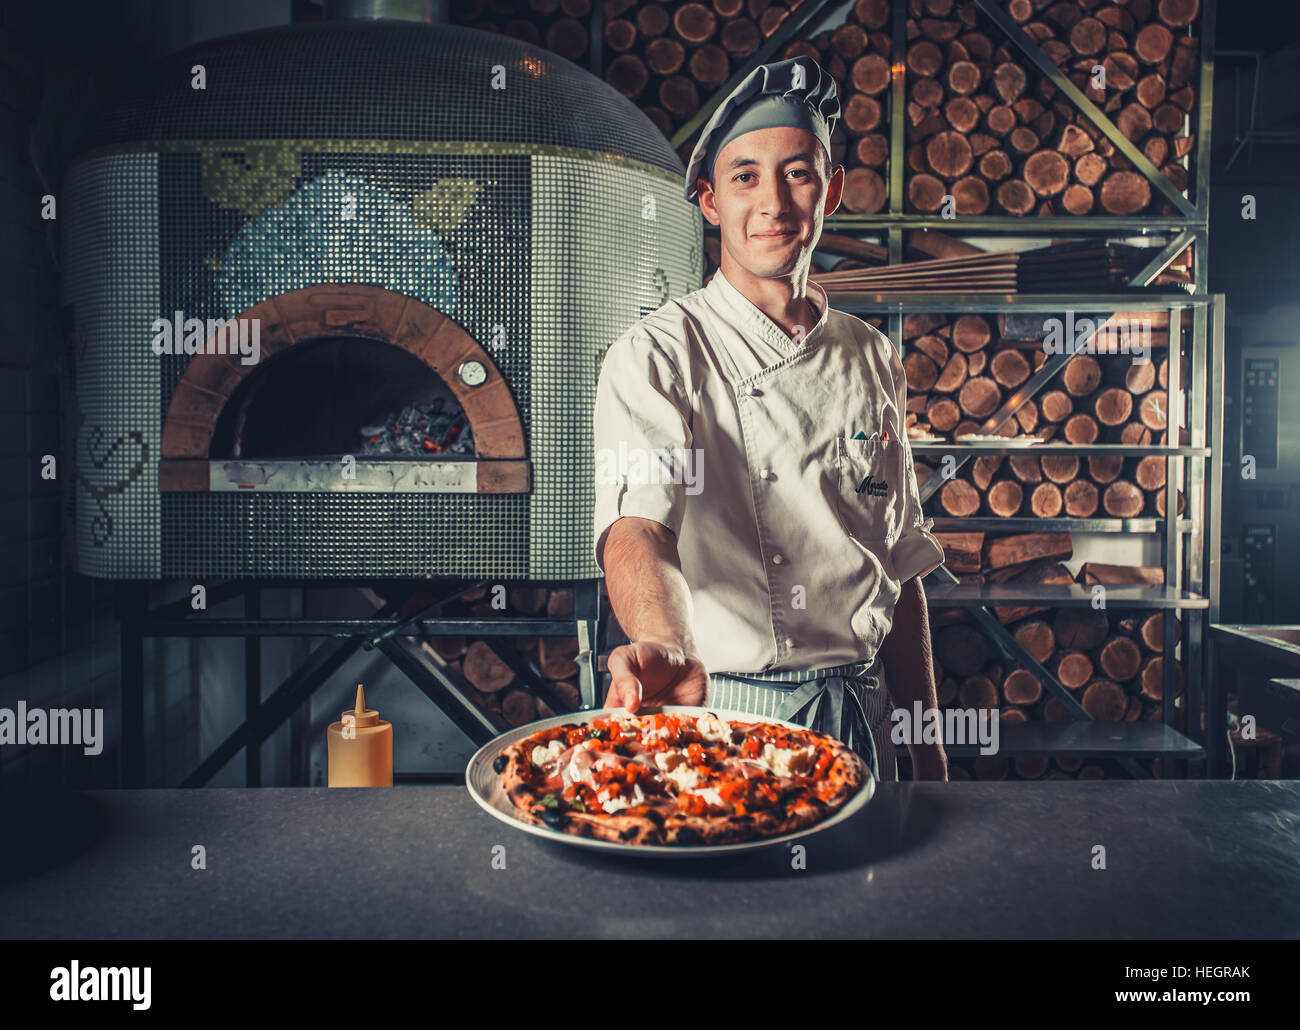 Man cook holding fresh cooked pizza Stock Photo